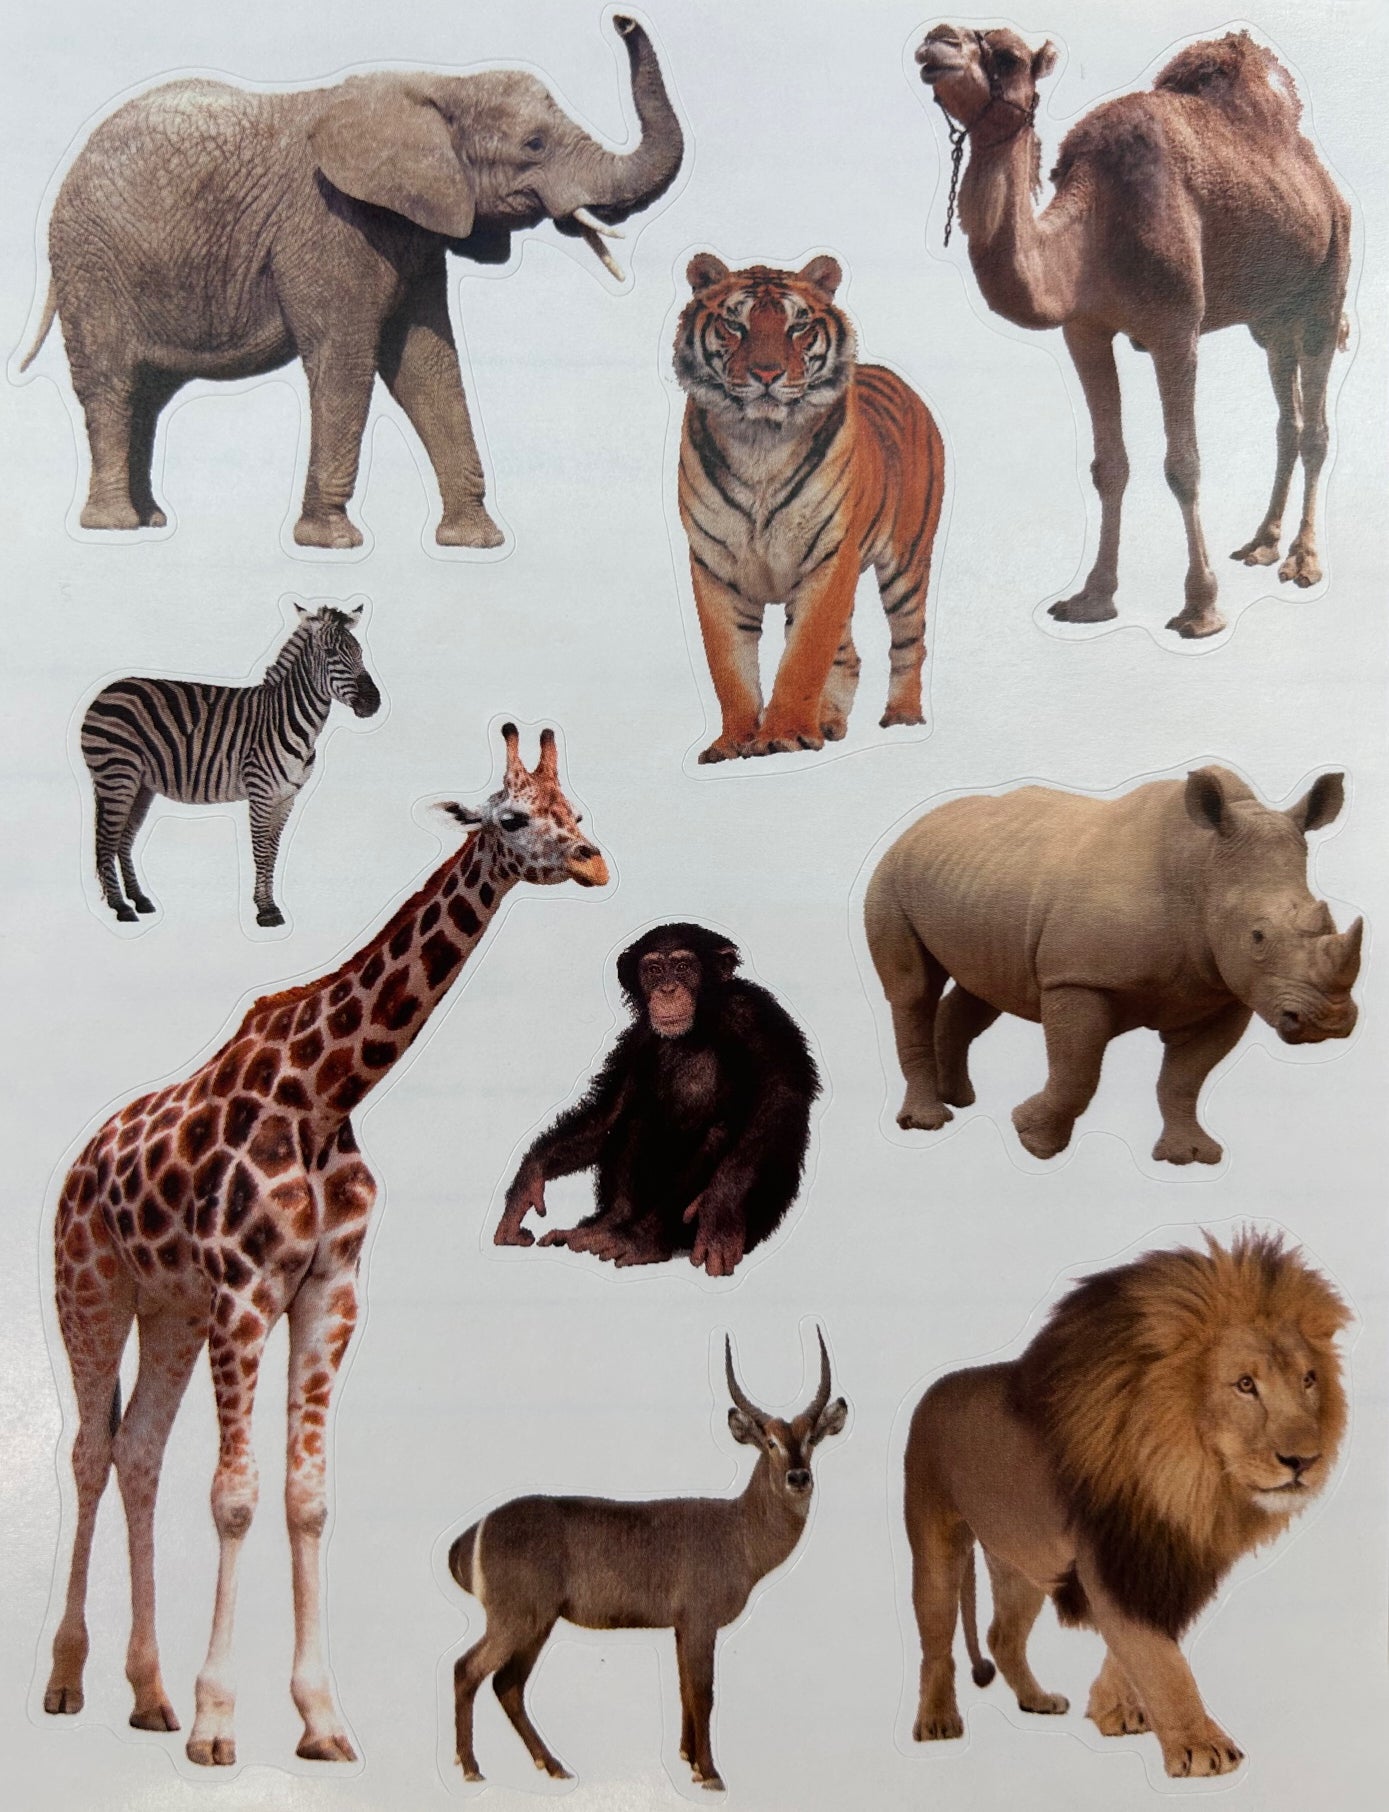 Safari Animal Stickers for Kids Arts and Crafts, Scrapbooking